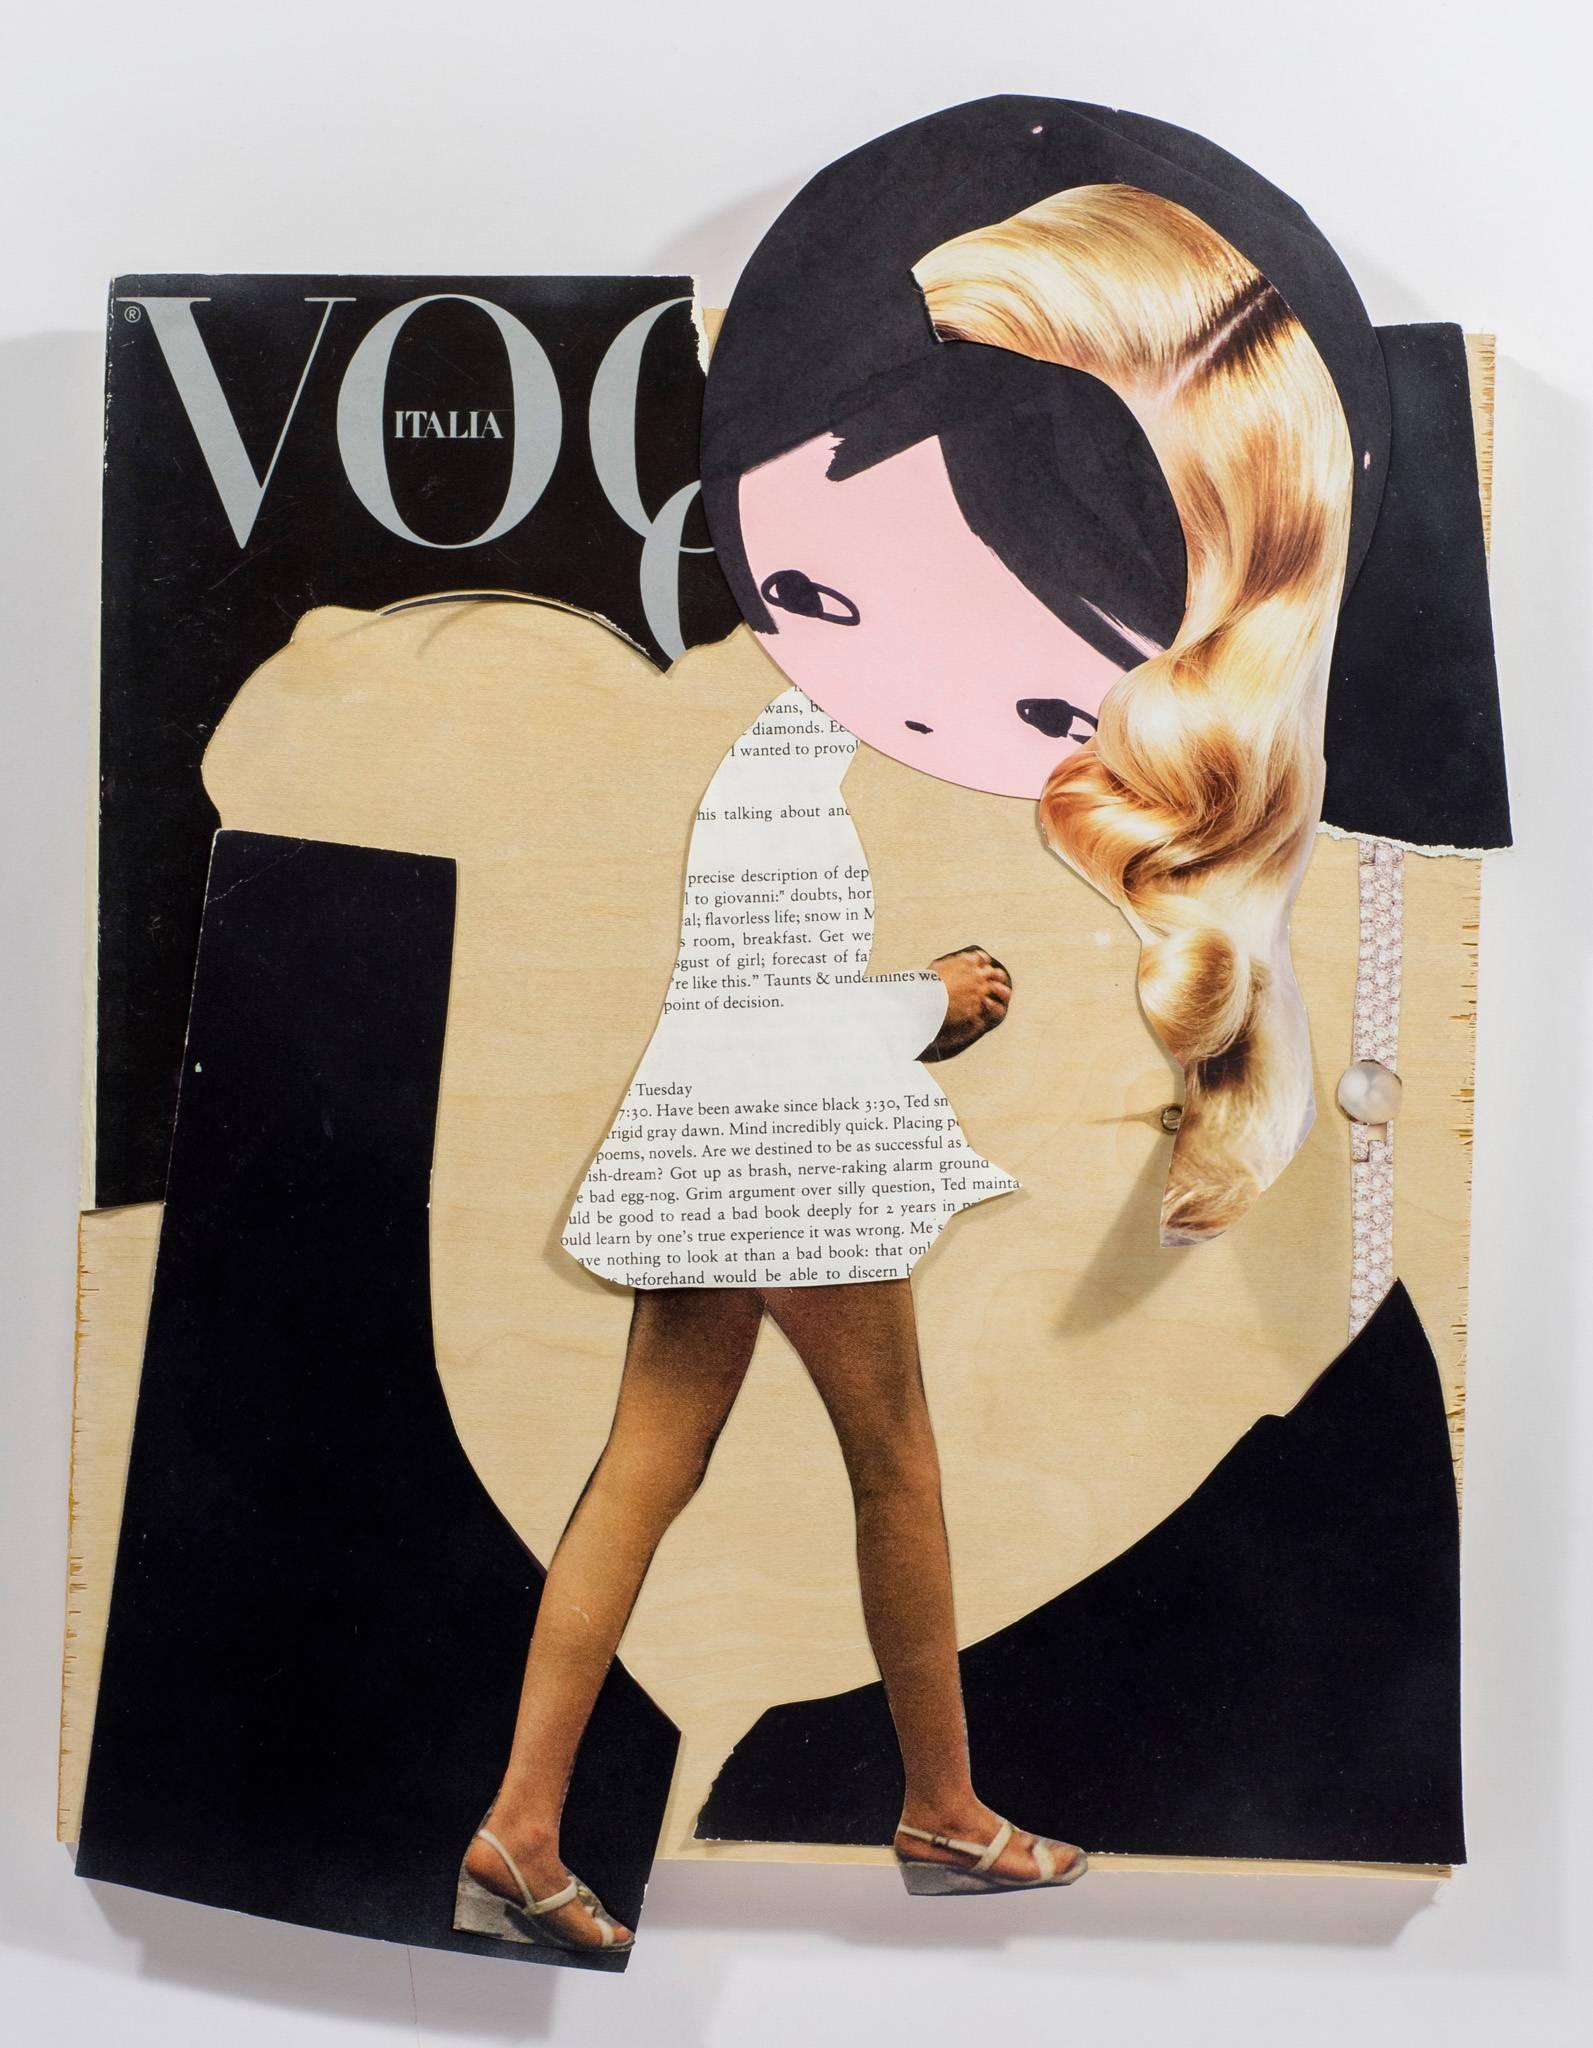 Vogue - Mixed Media Art by Phoebe New York